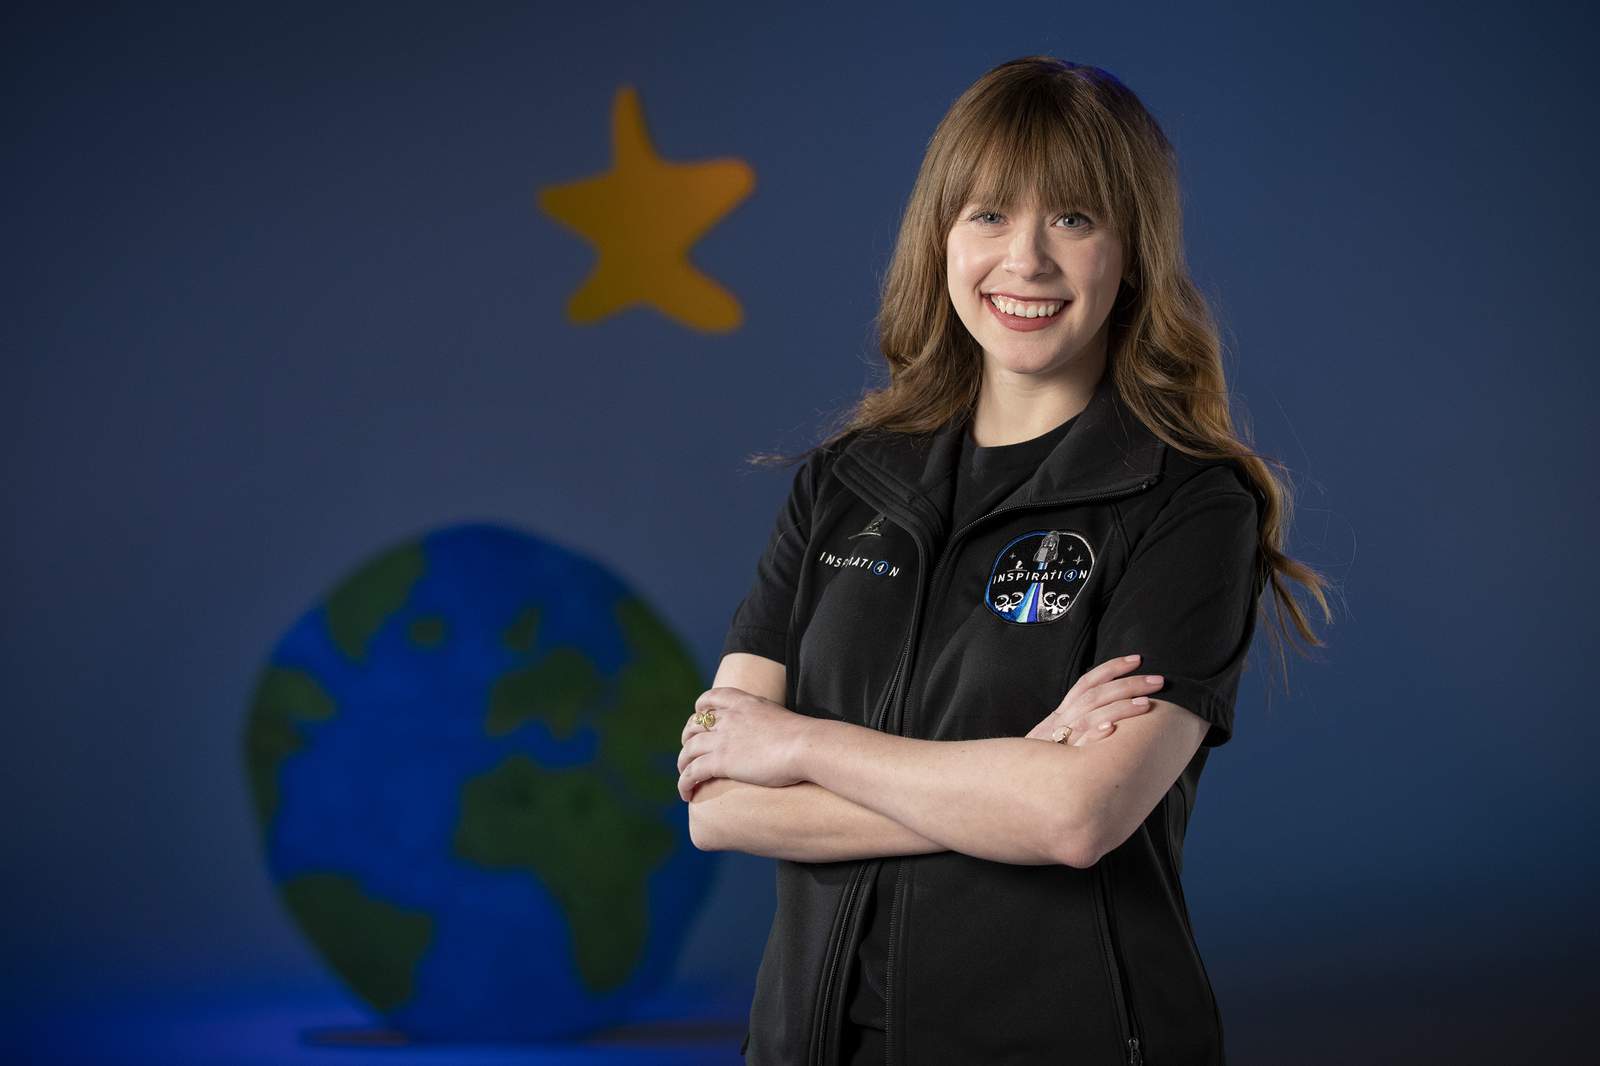 Meet the bone cancer survivor who will become the youngest American in space